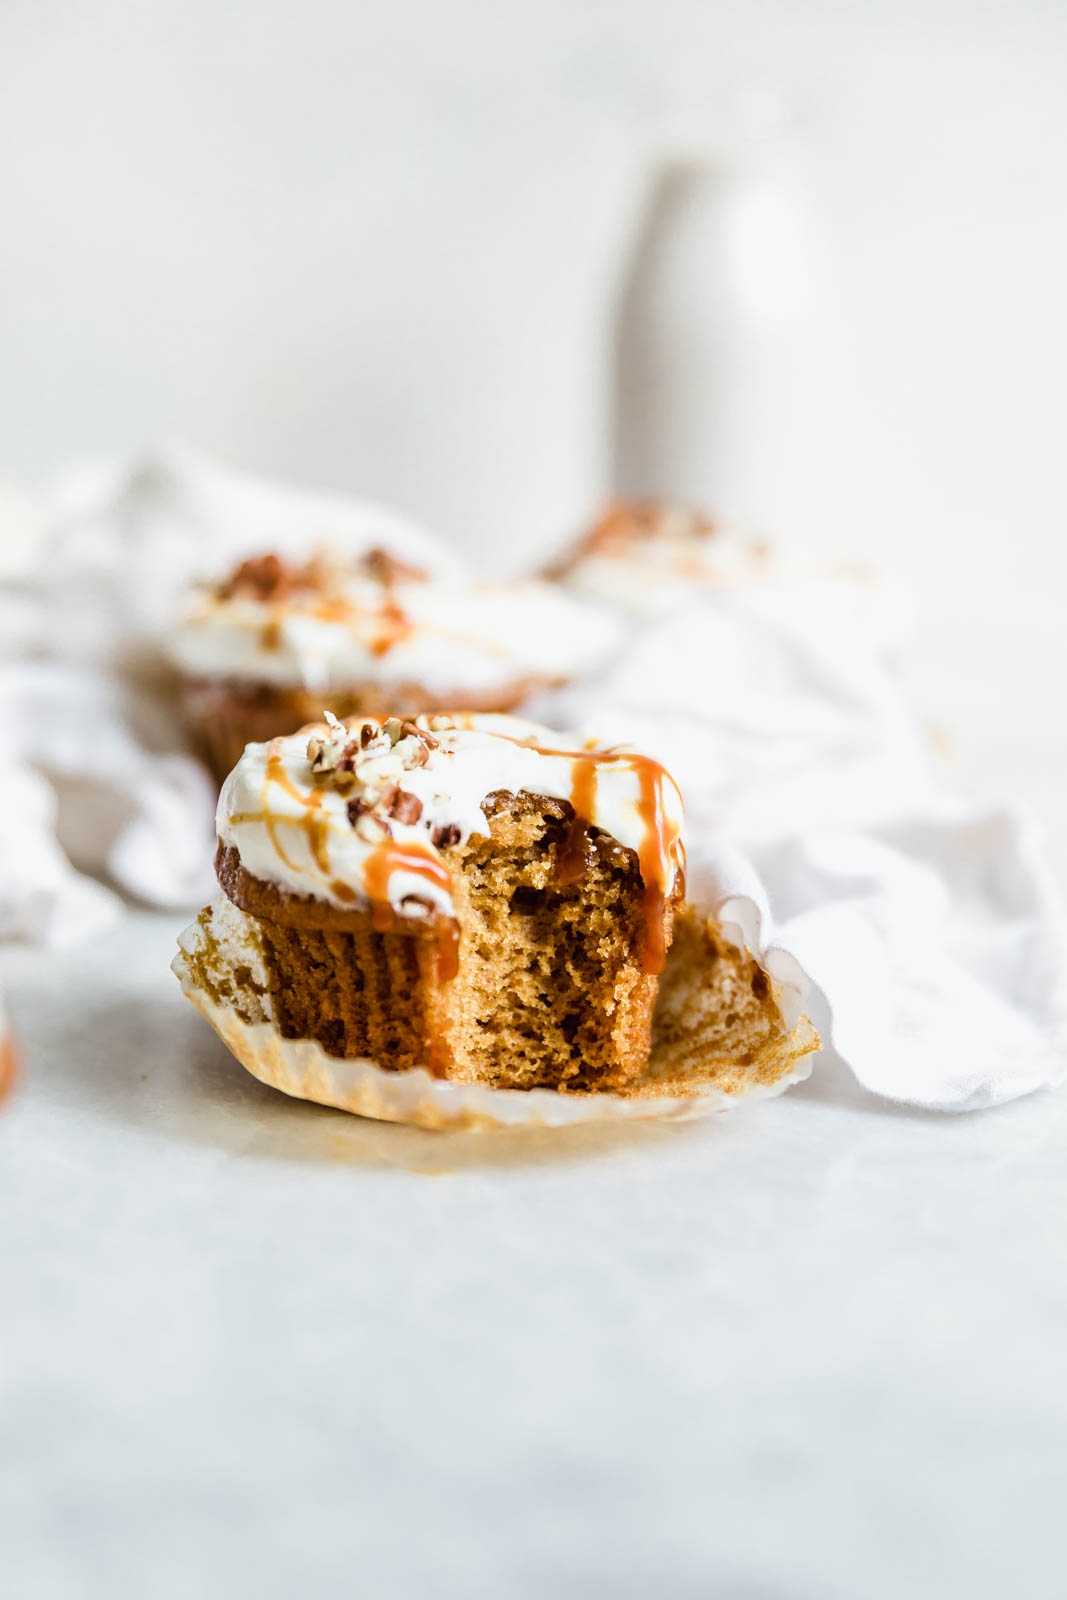 The perfect winter cupcake is here! Sweet potato cupcakes flavored with cinnamon and ginger and topped with a tangy cream cheese frosting.